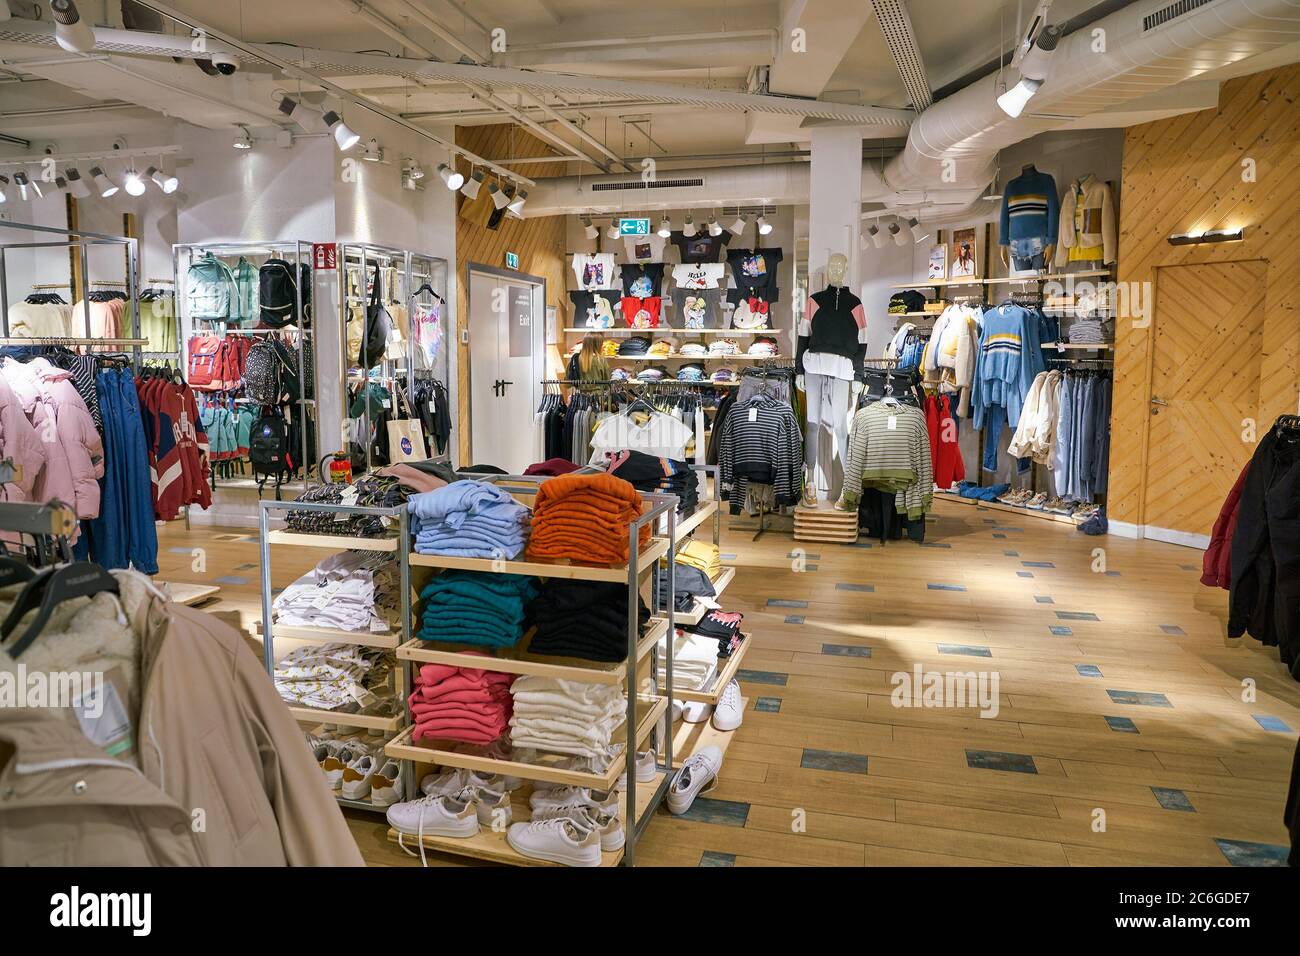 BERLIN, GERMANY - CIRCA SEPTEMBER, 2019: interior shot of a Pull&Bear store in Berlin. Pull&Bear is a Spanish clothing and accessories retailer Stock Photo